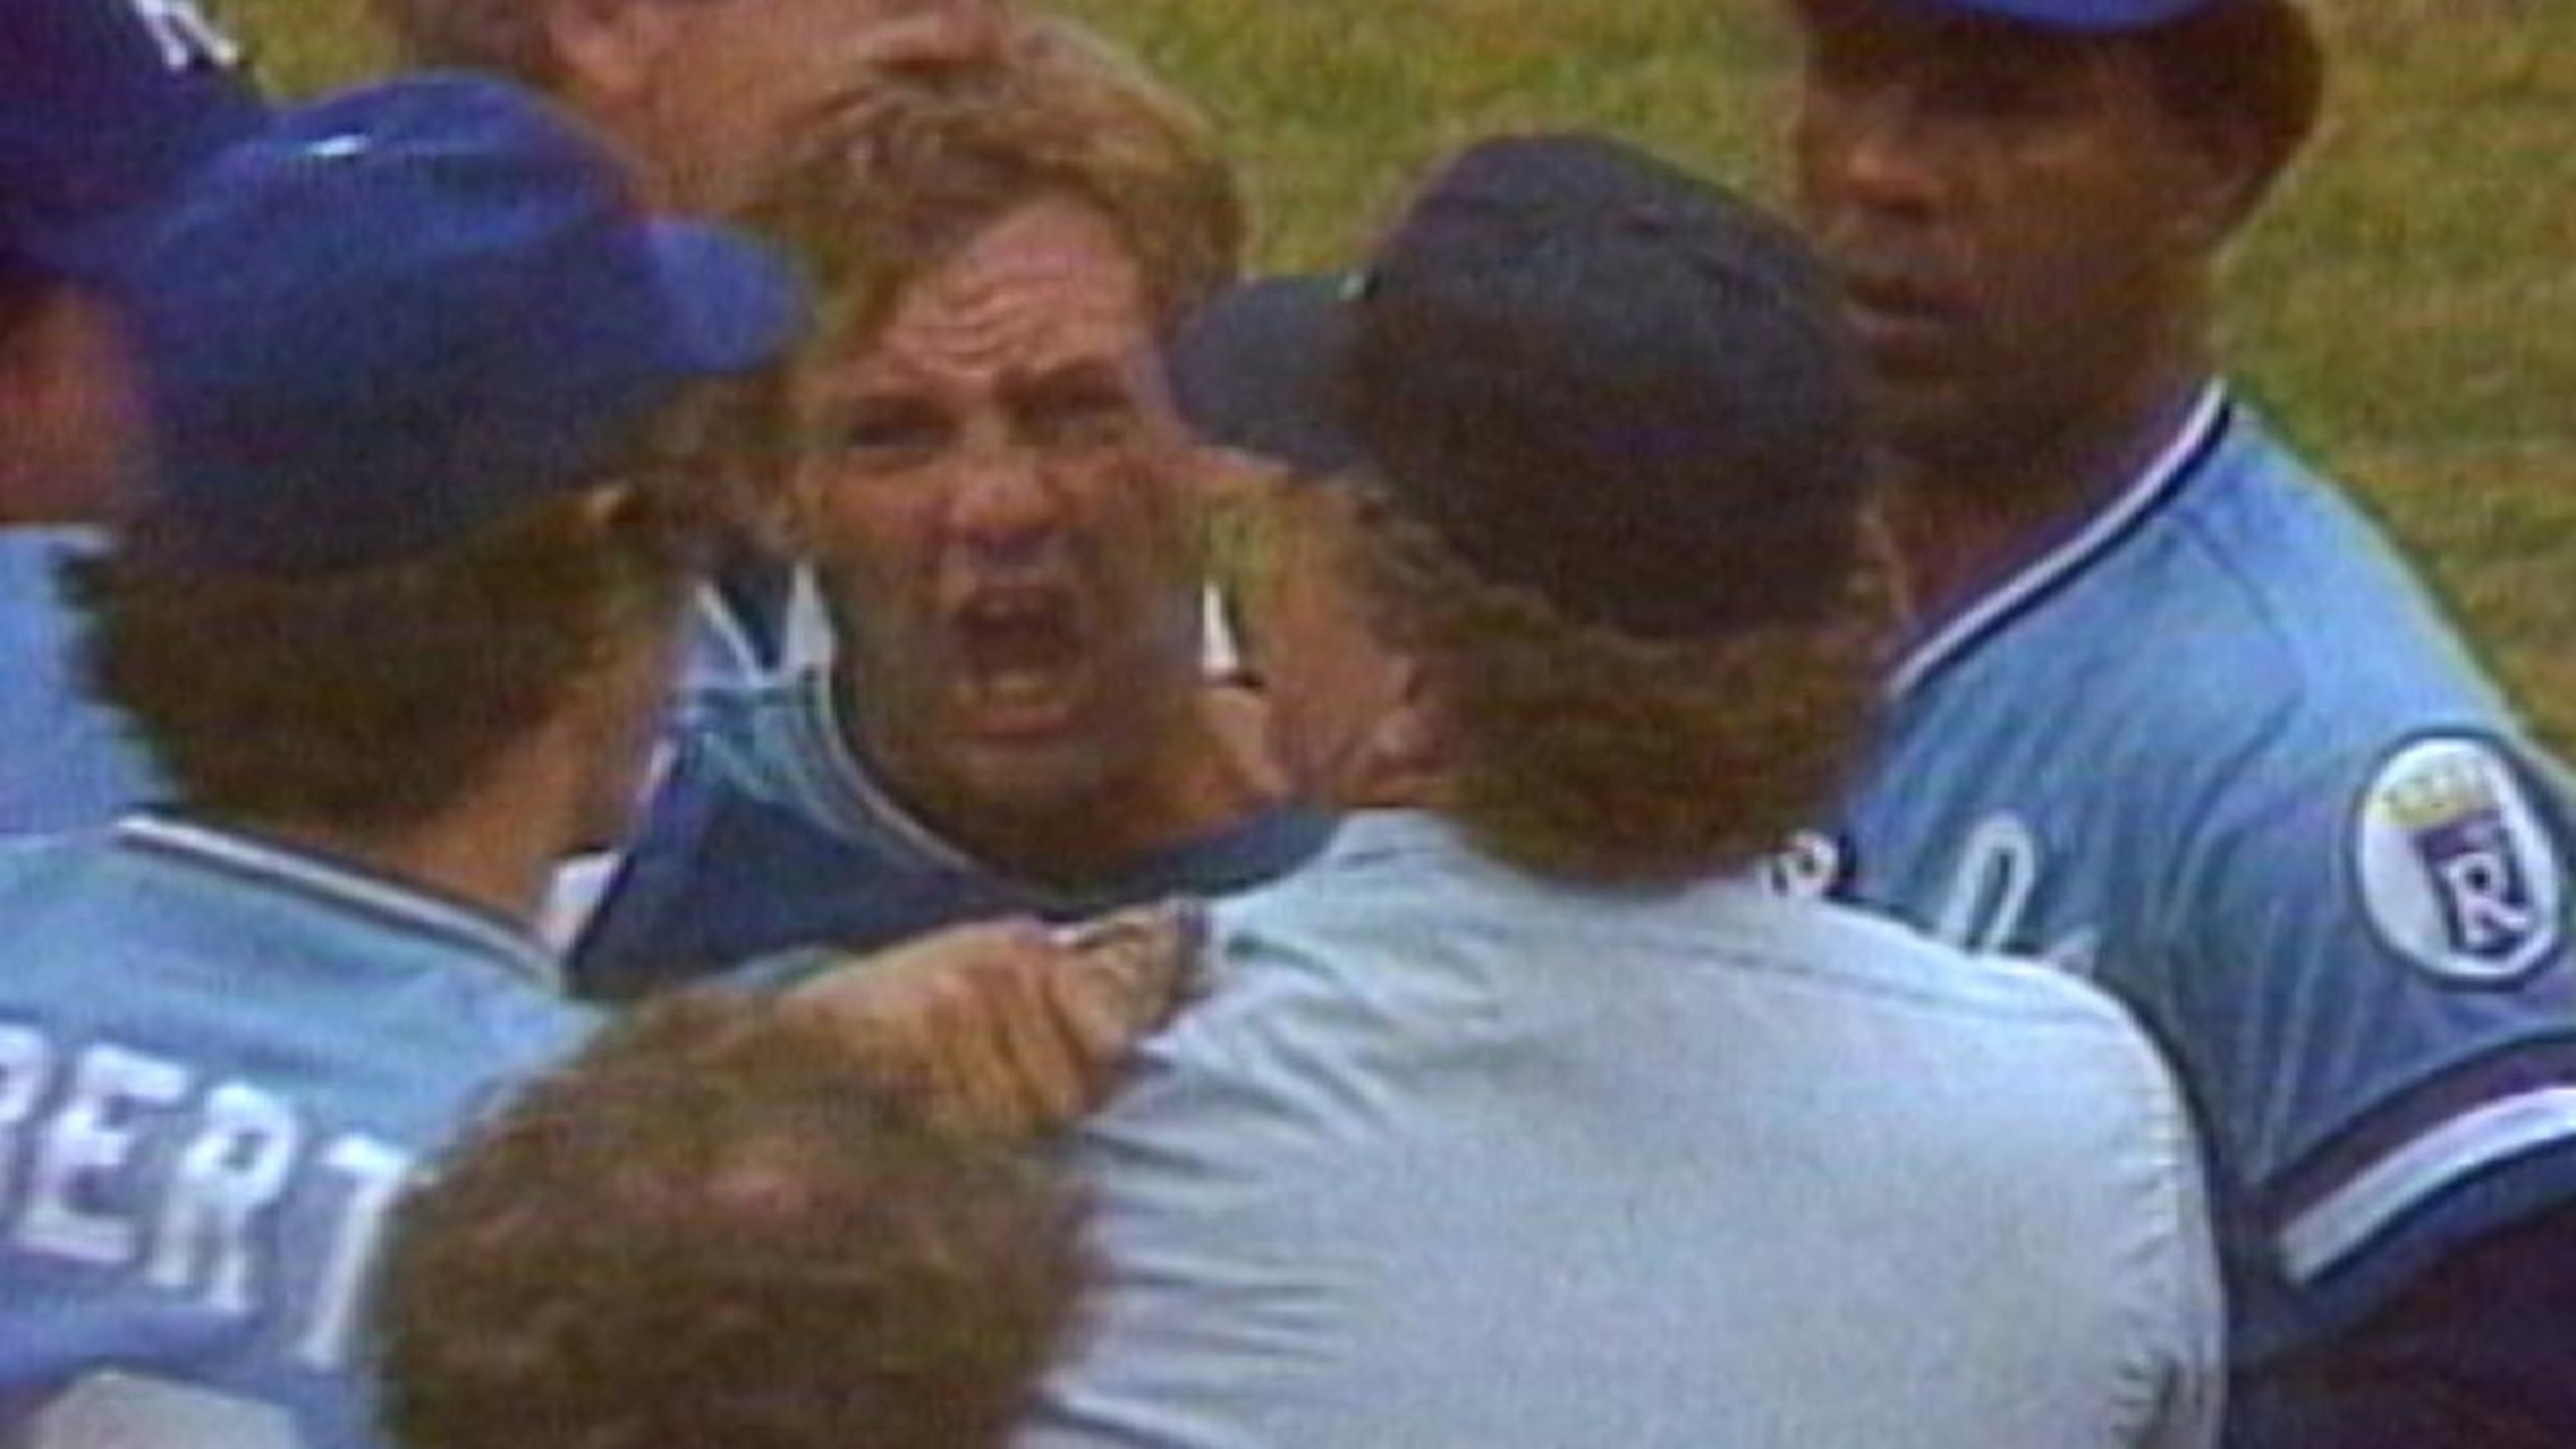 MLB Network to air George Brett programming on his 67th birthday - Royals  Review